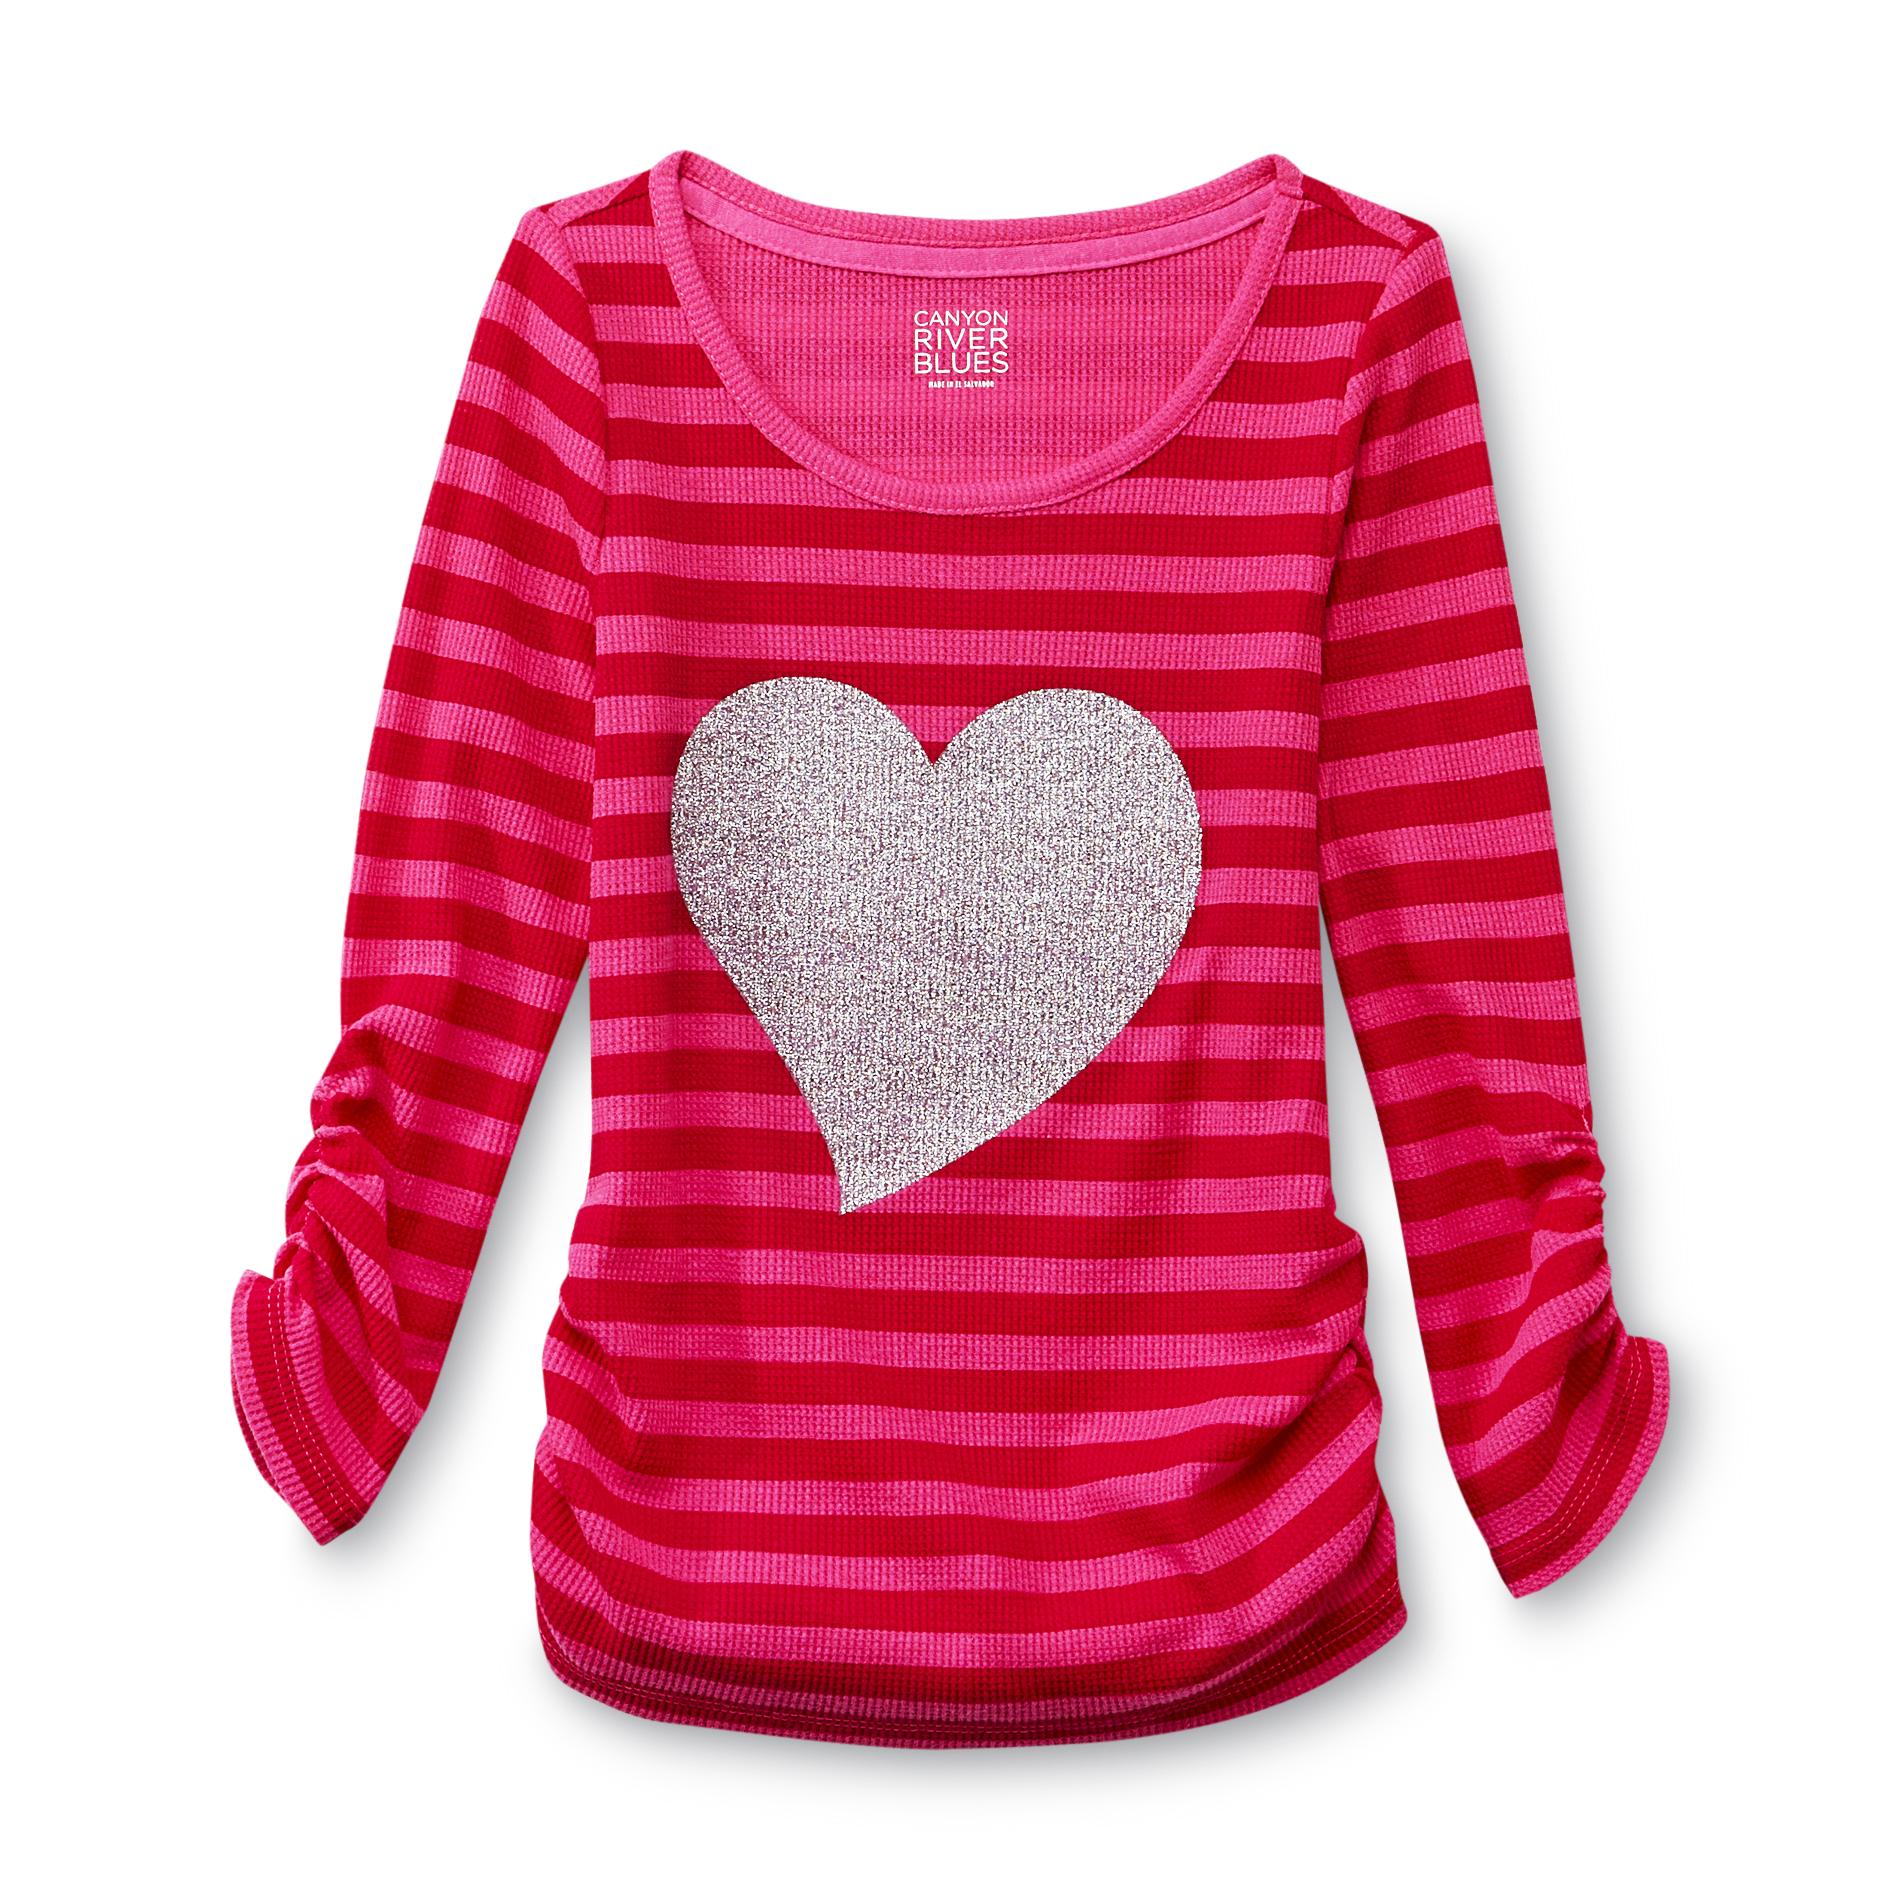 Canyon River Blues Girl's Thermal Top - Heart